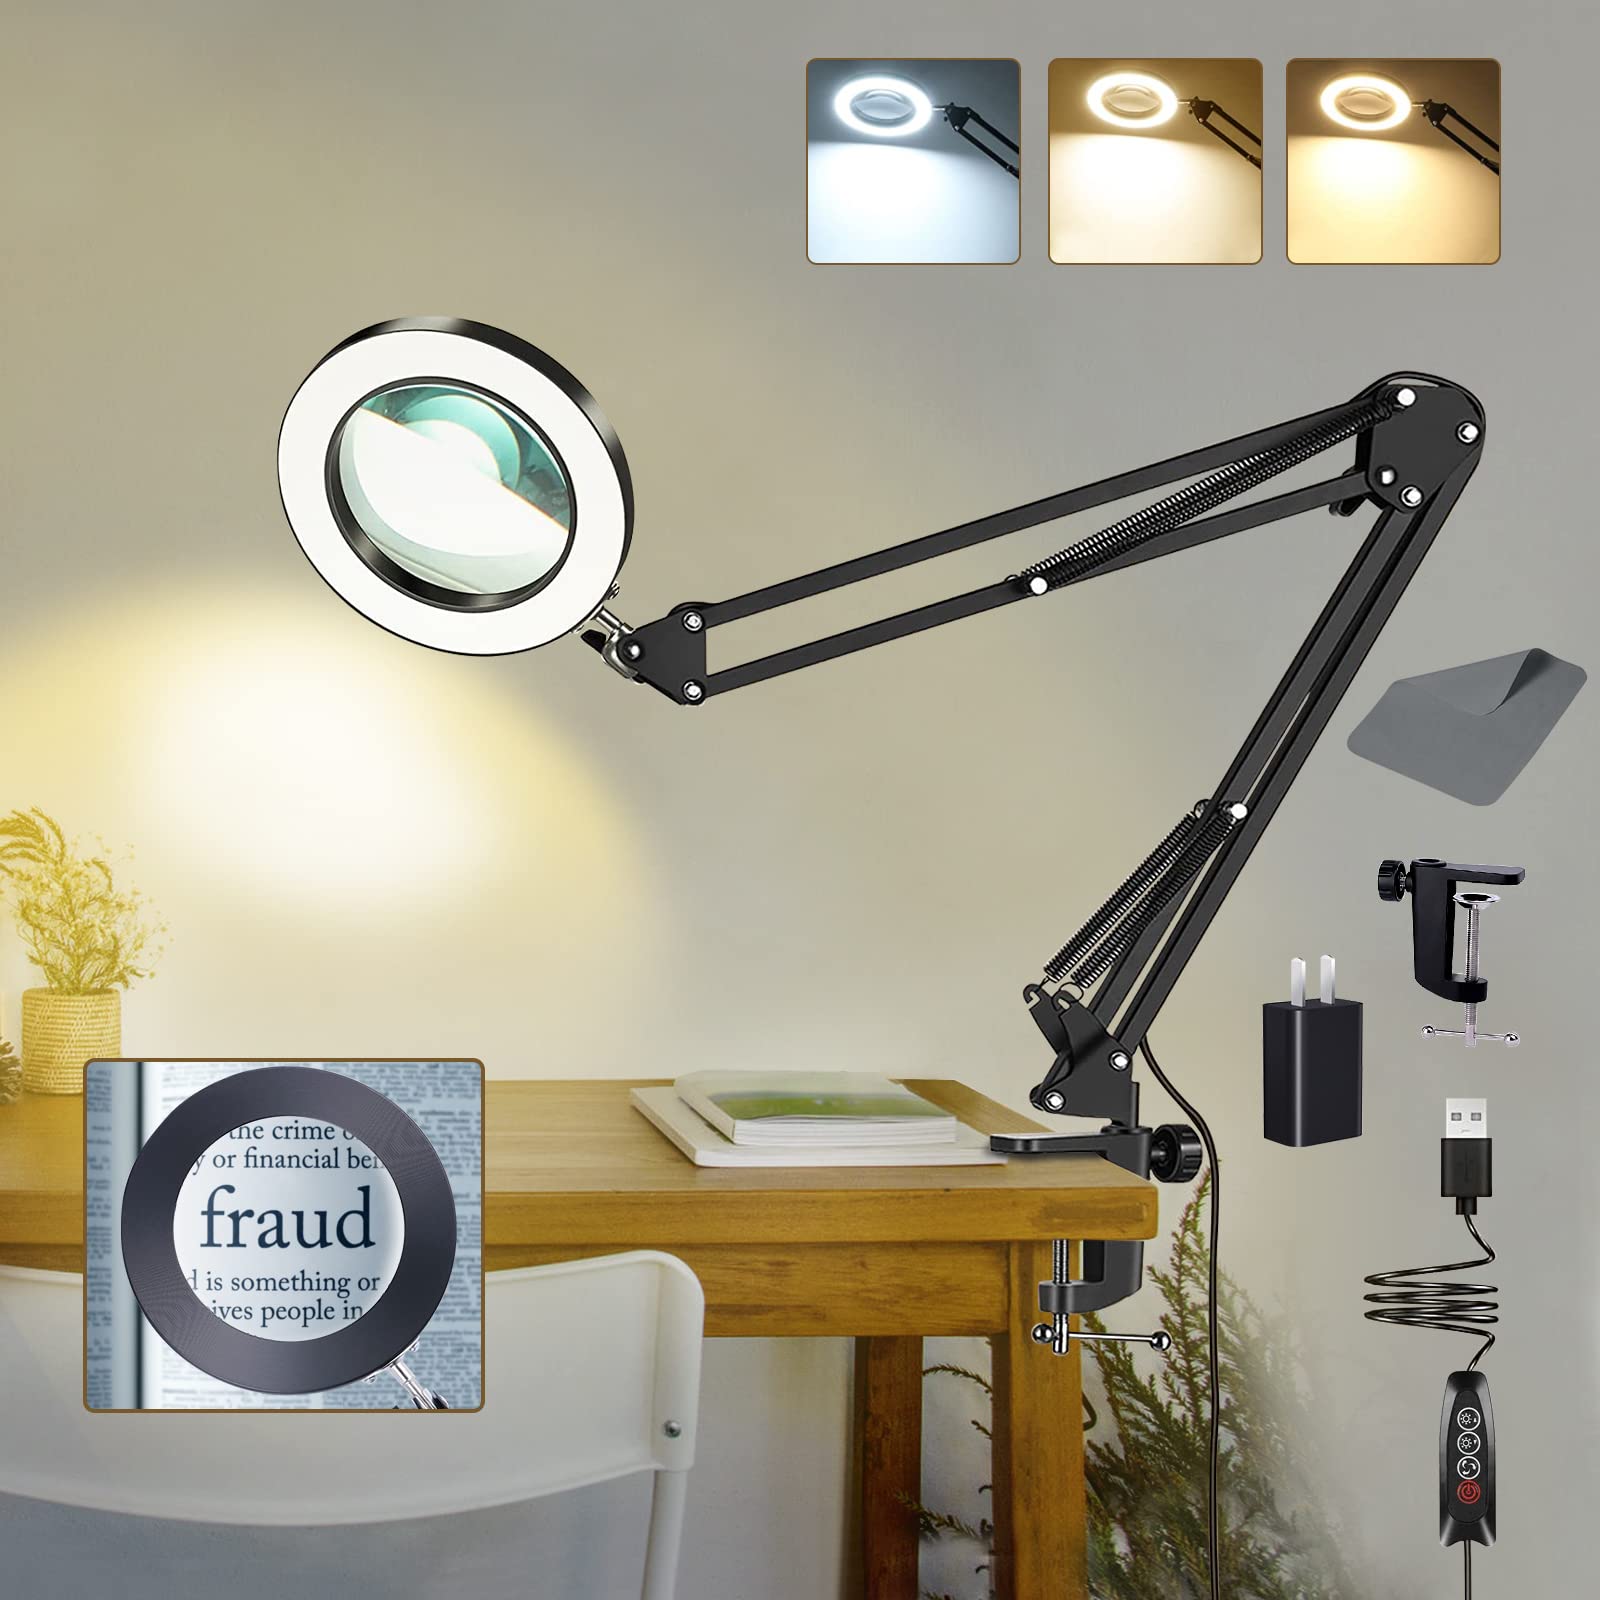 10X Magnifying Glass with Light, Lighted Magnifying Glass